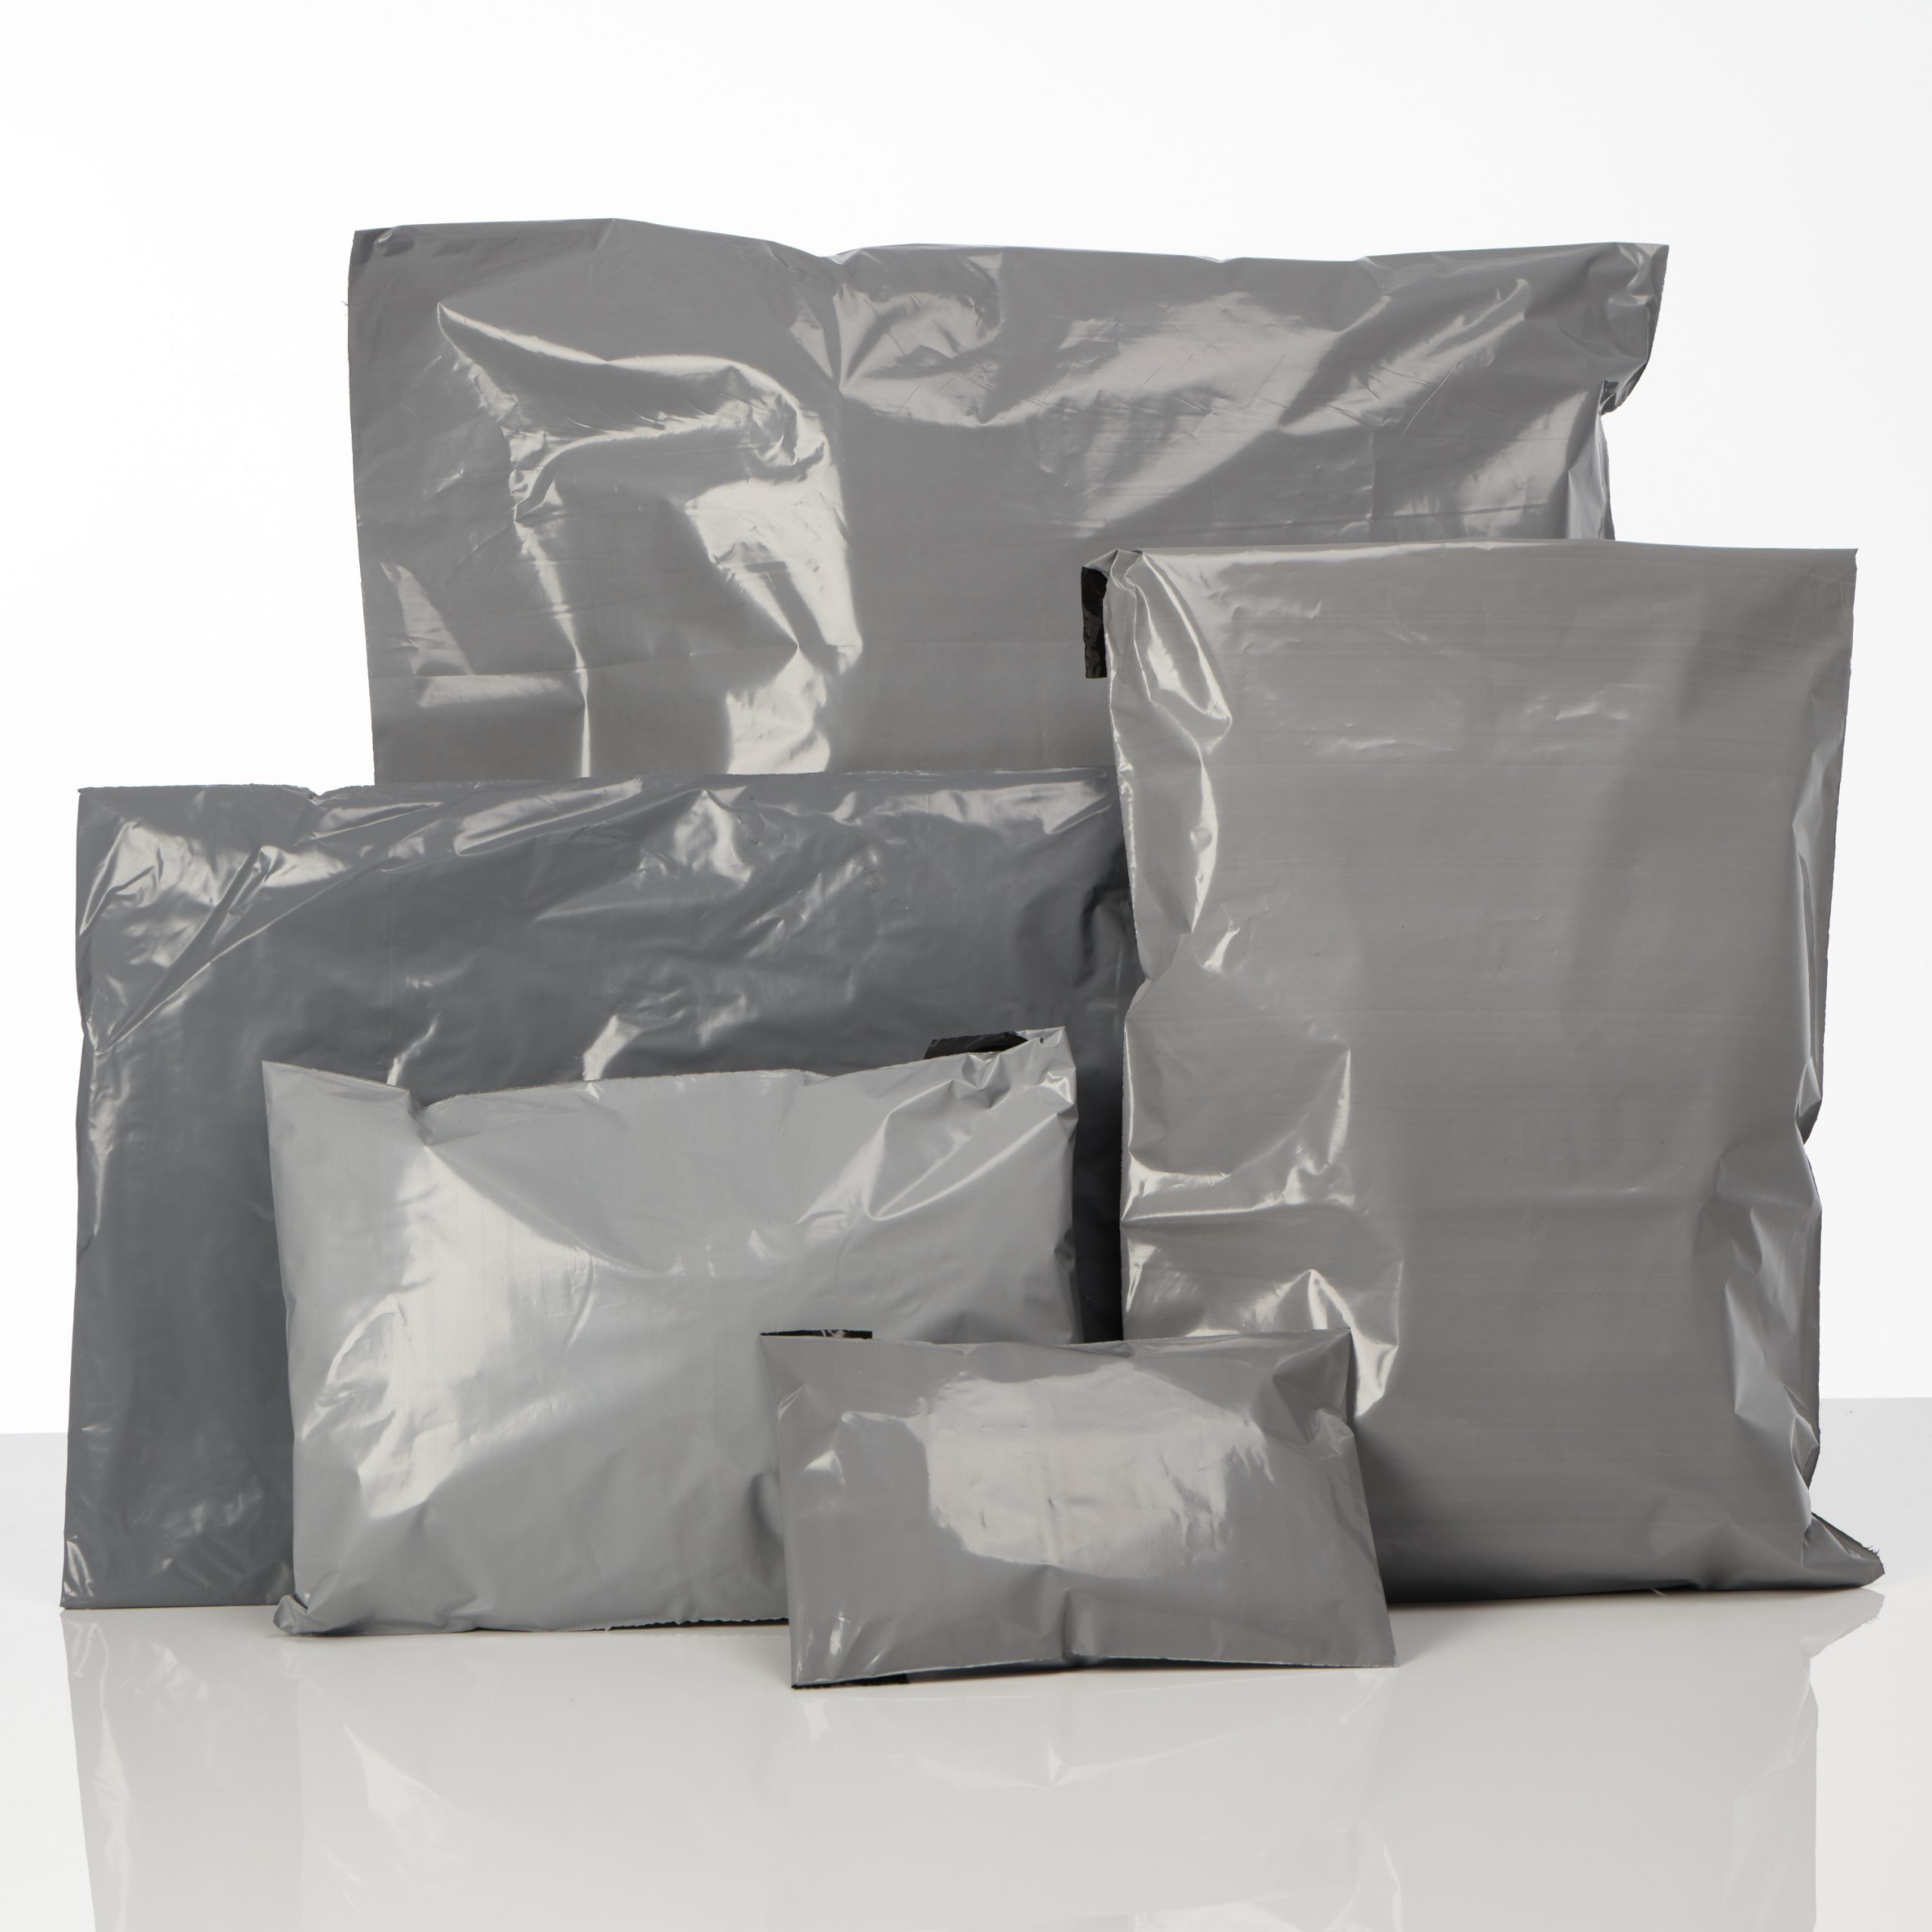 NEW STRONG POLY MAILING POSTAGE POSTAL QUALITY SELF SEAL GREY MAILING BAGS 